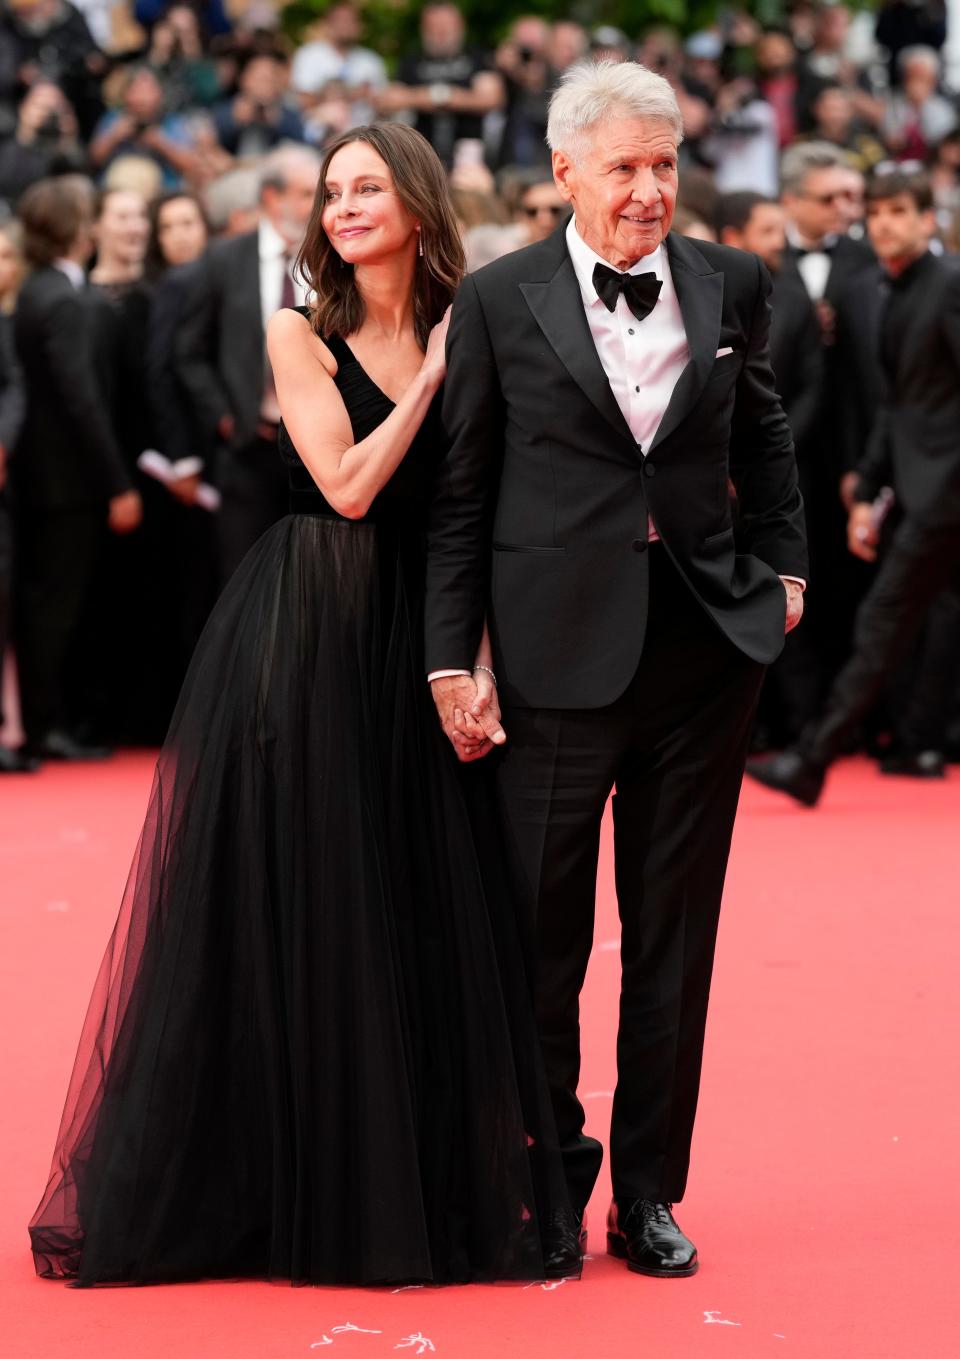 Calista Flockhart, left, and Harrison Ford pose for photographers at the red carpet premiere of "Indiana Jones and the Dial of Destiny" at Cannes Film Festival.